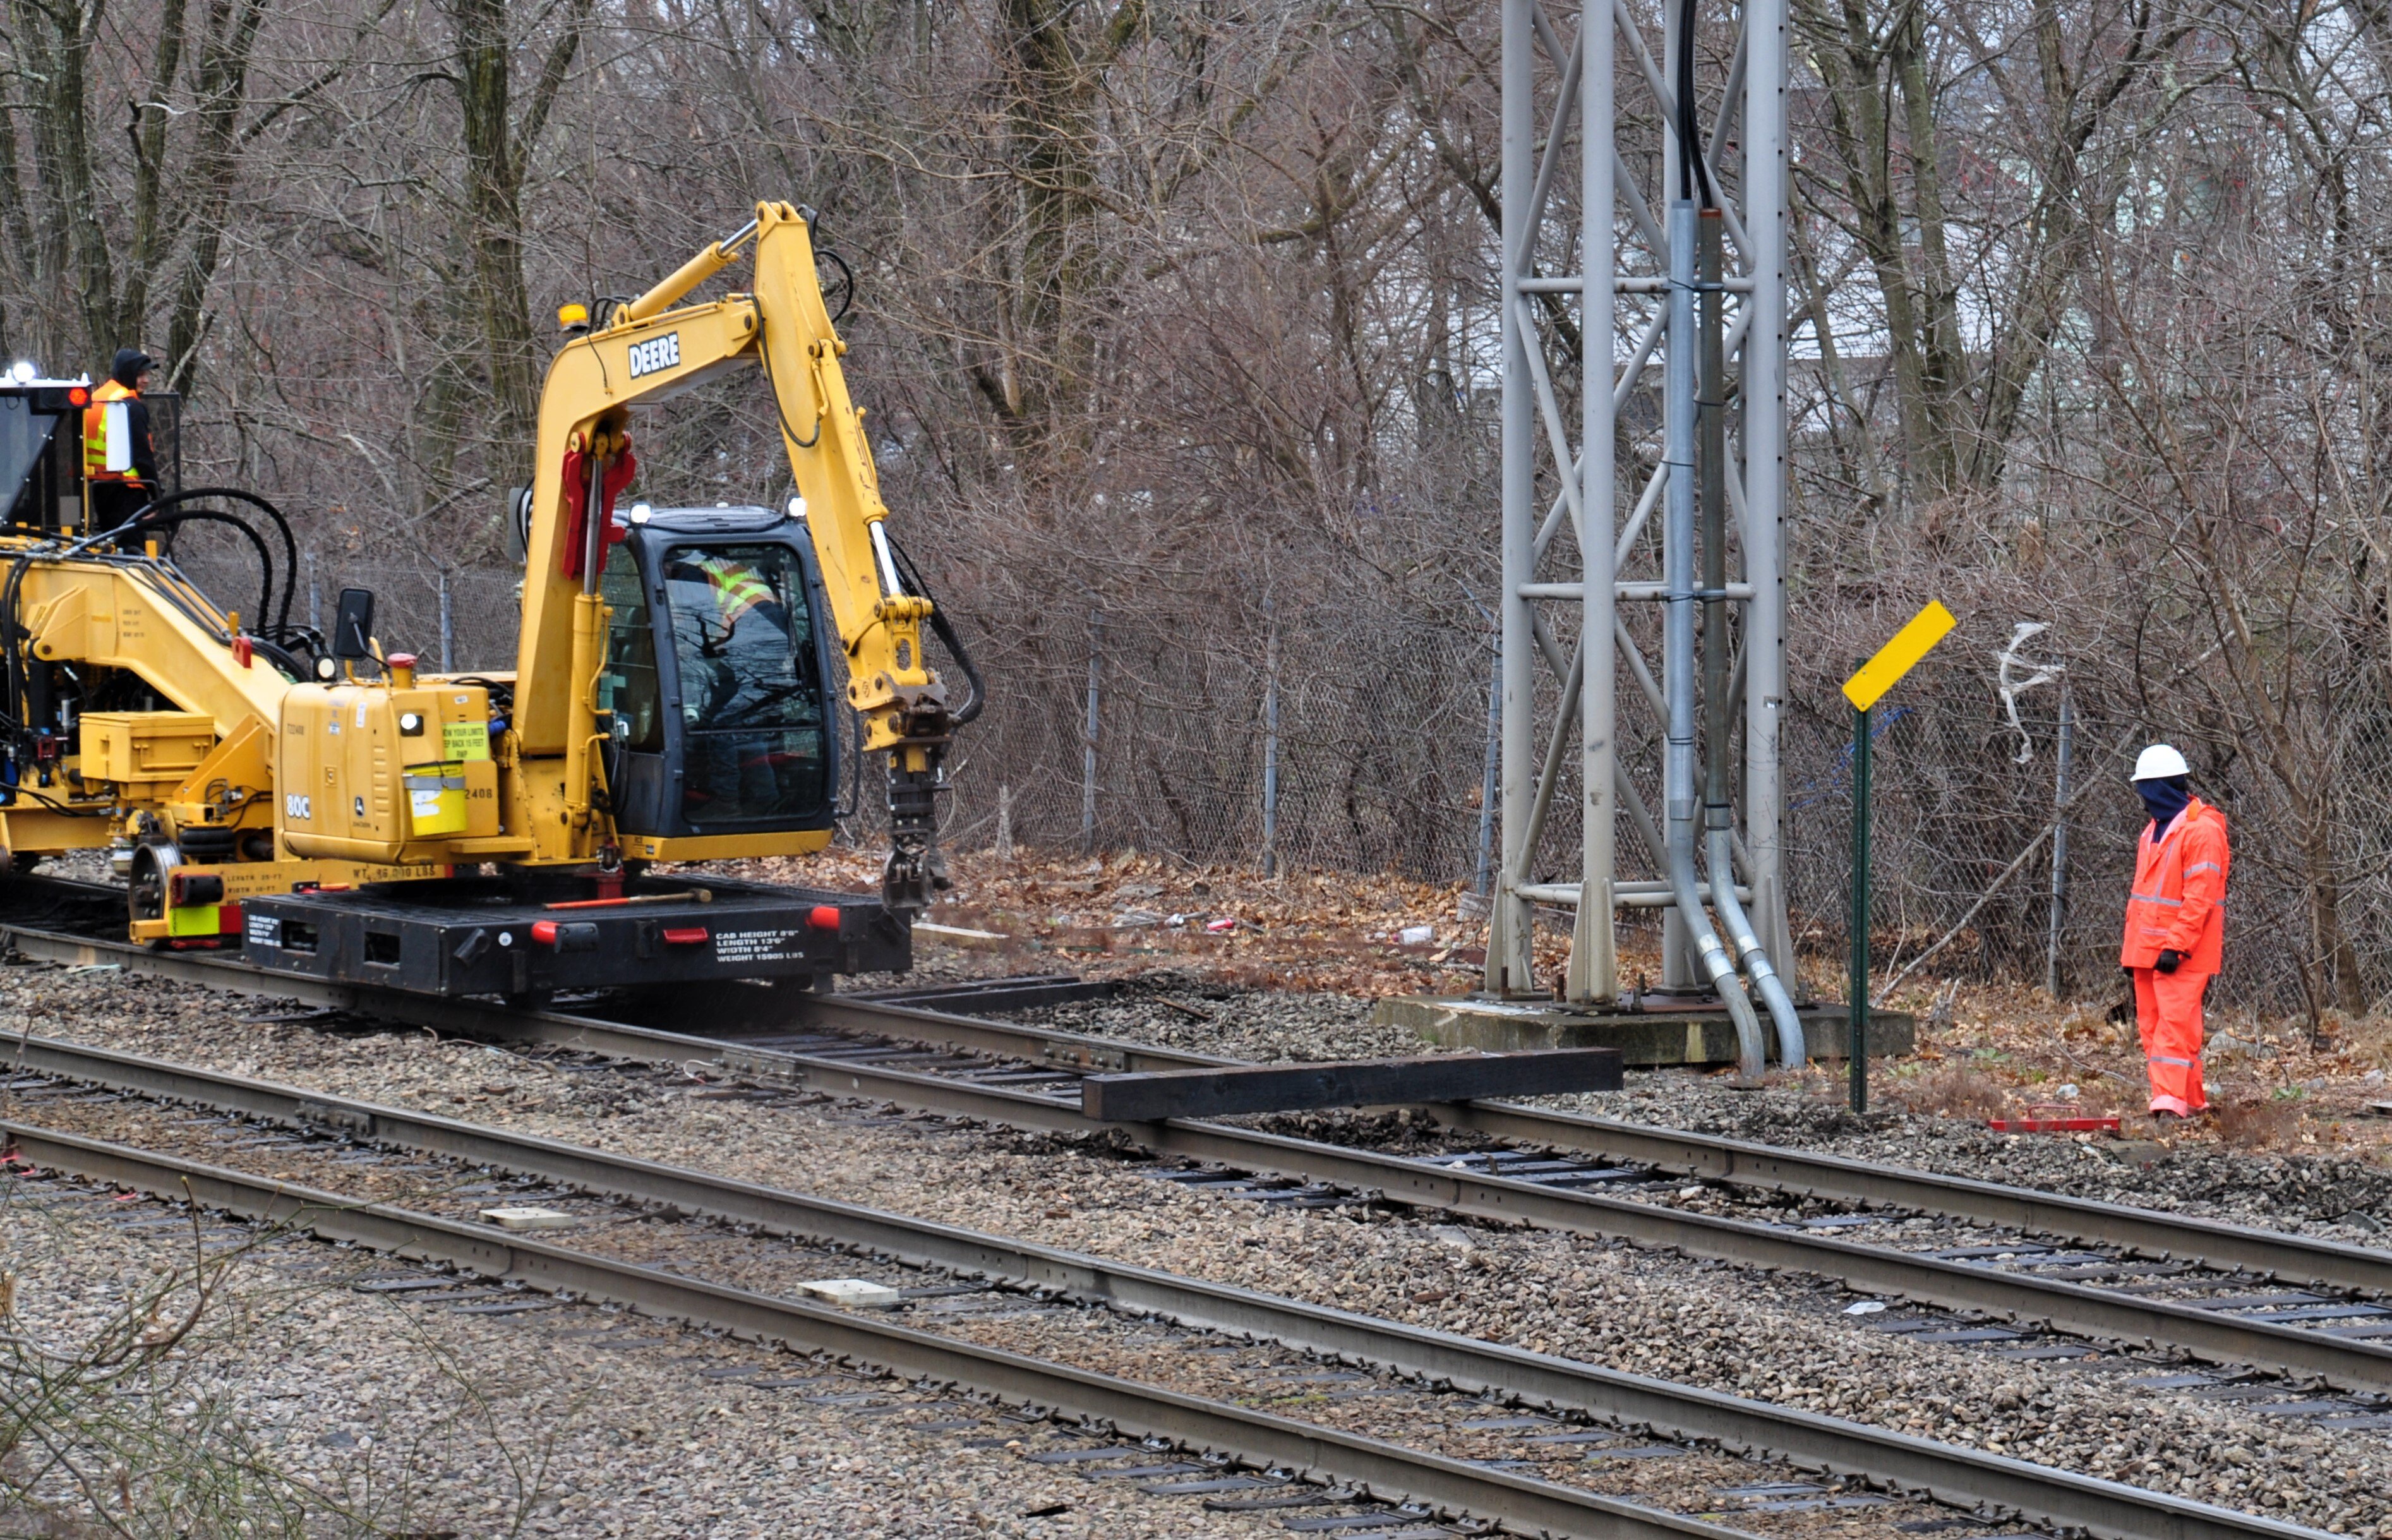 A crew works with heavy machinery to repair train tracks